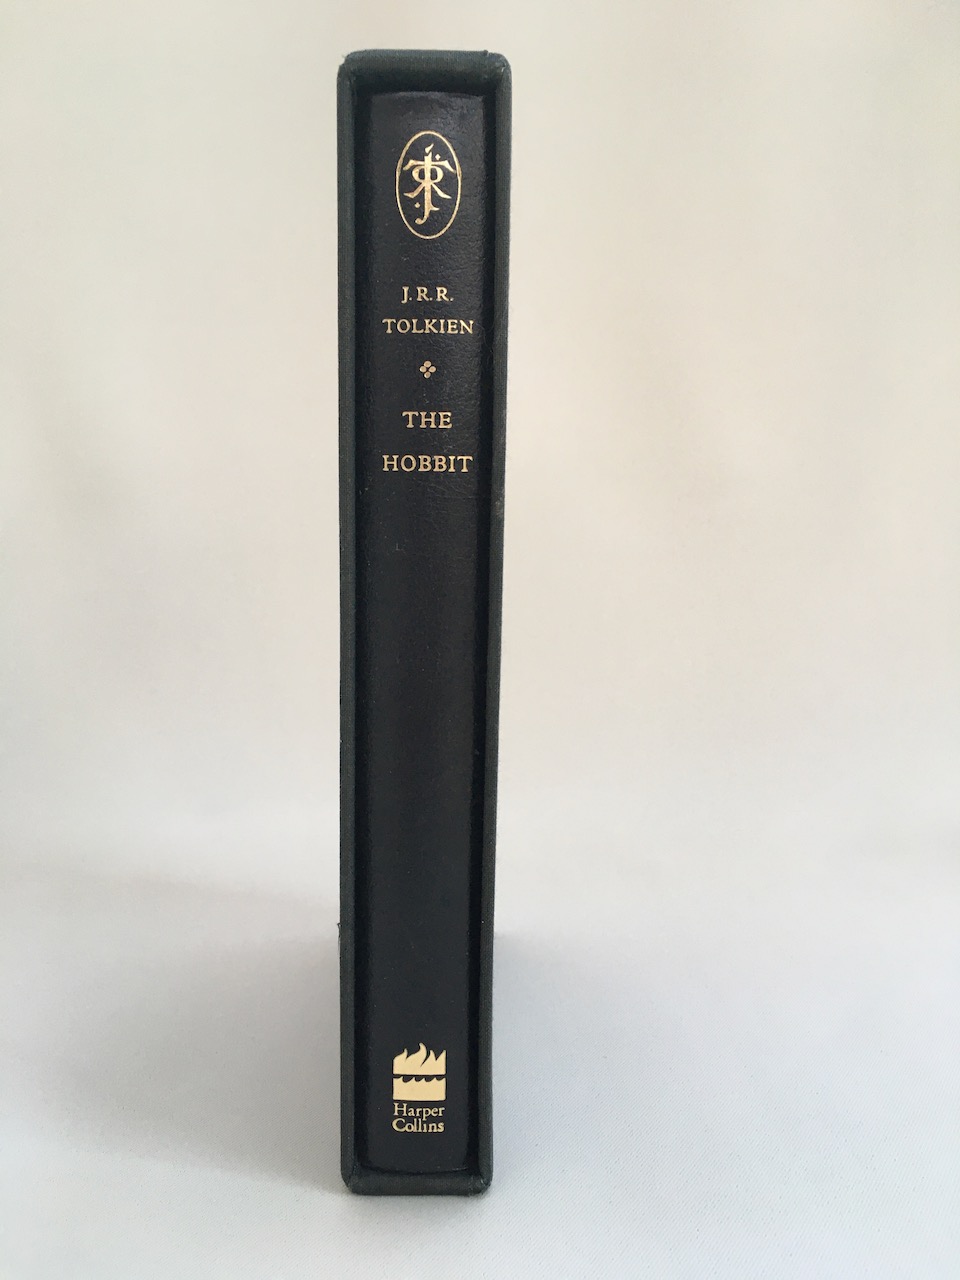 
 The Hobbit by J.R.R. Tolkien, 1999 Limited Edition, one of 2500 copies 1